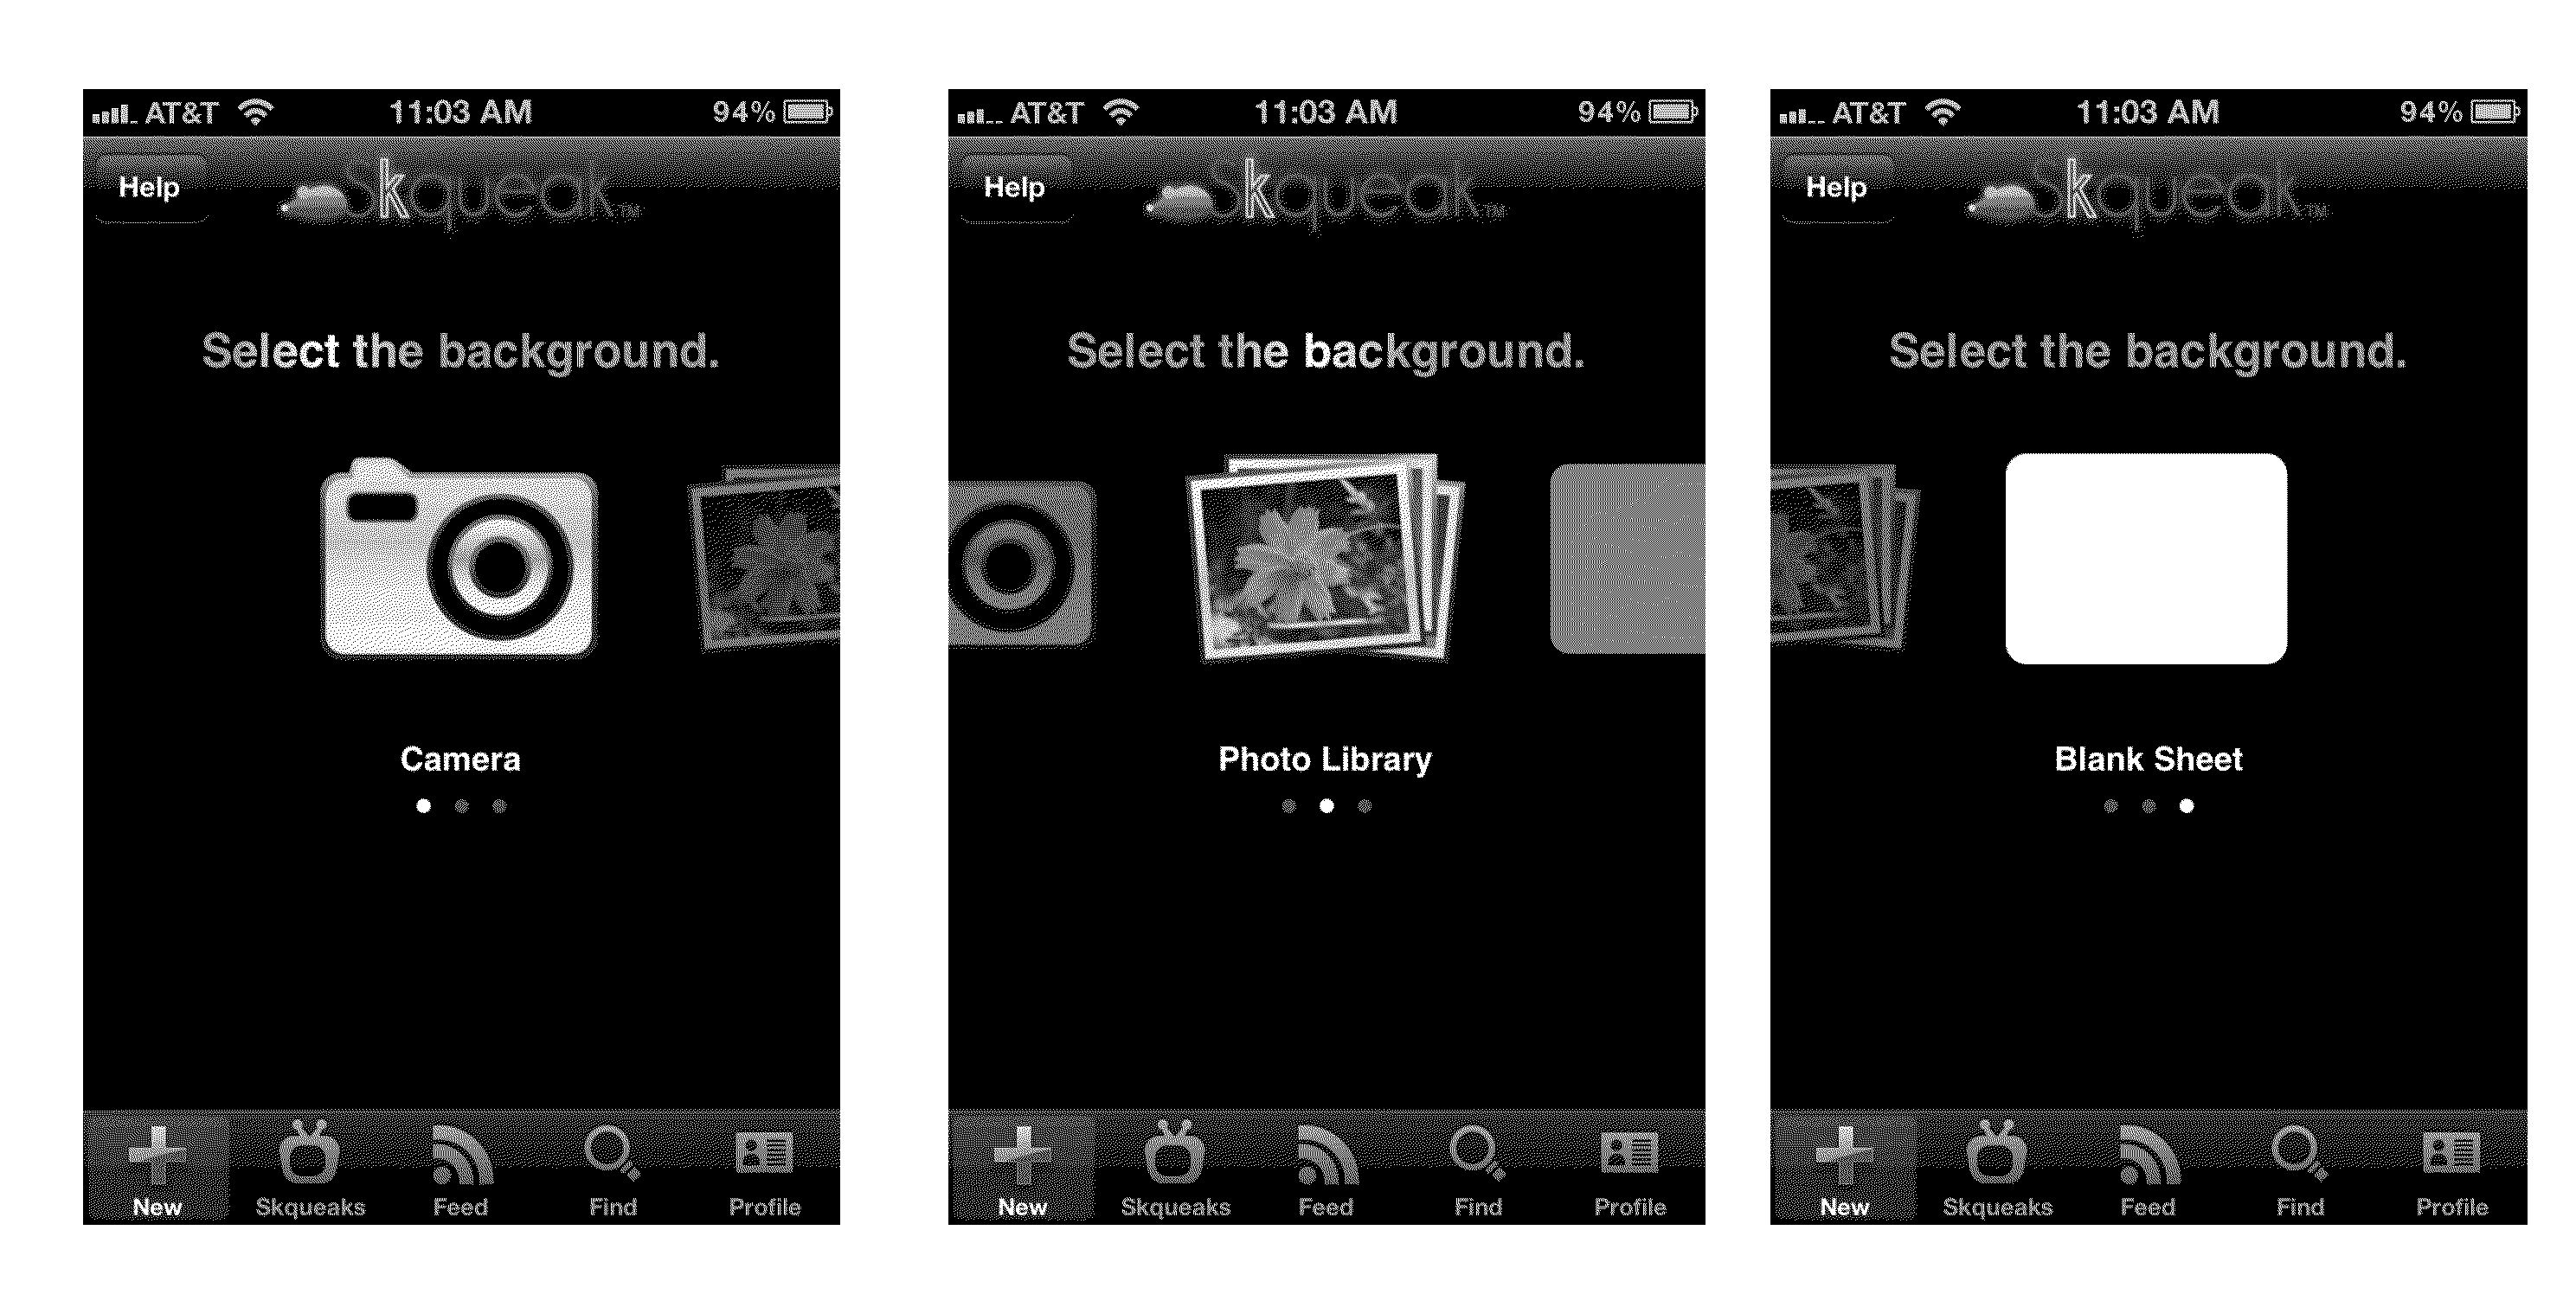 System and method for electronic communication using a voiceover in combination with user interaction events on a selected background